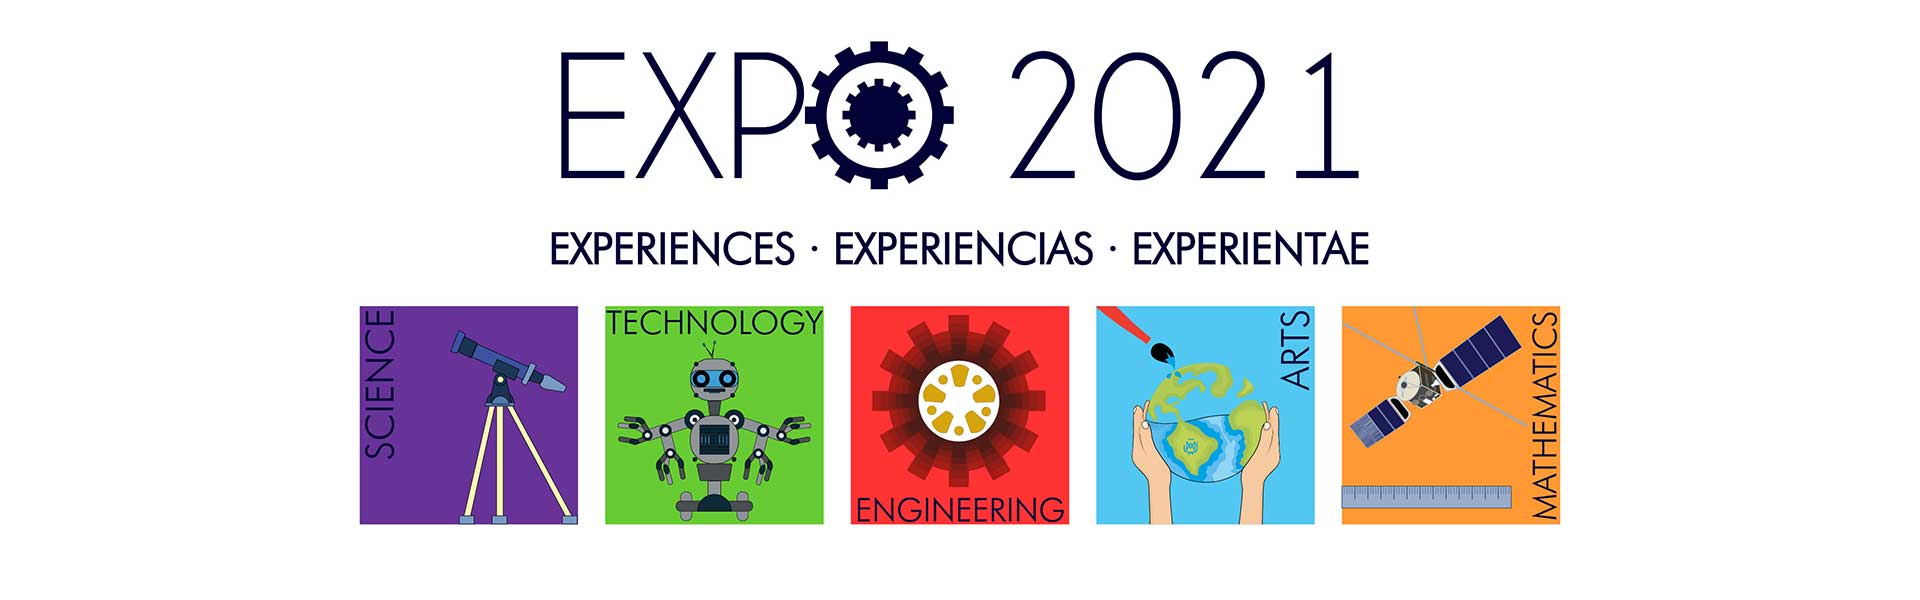 Banner-Expo-2021-1920×600